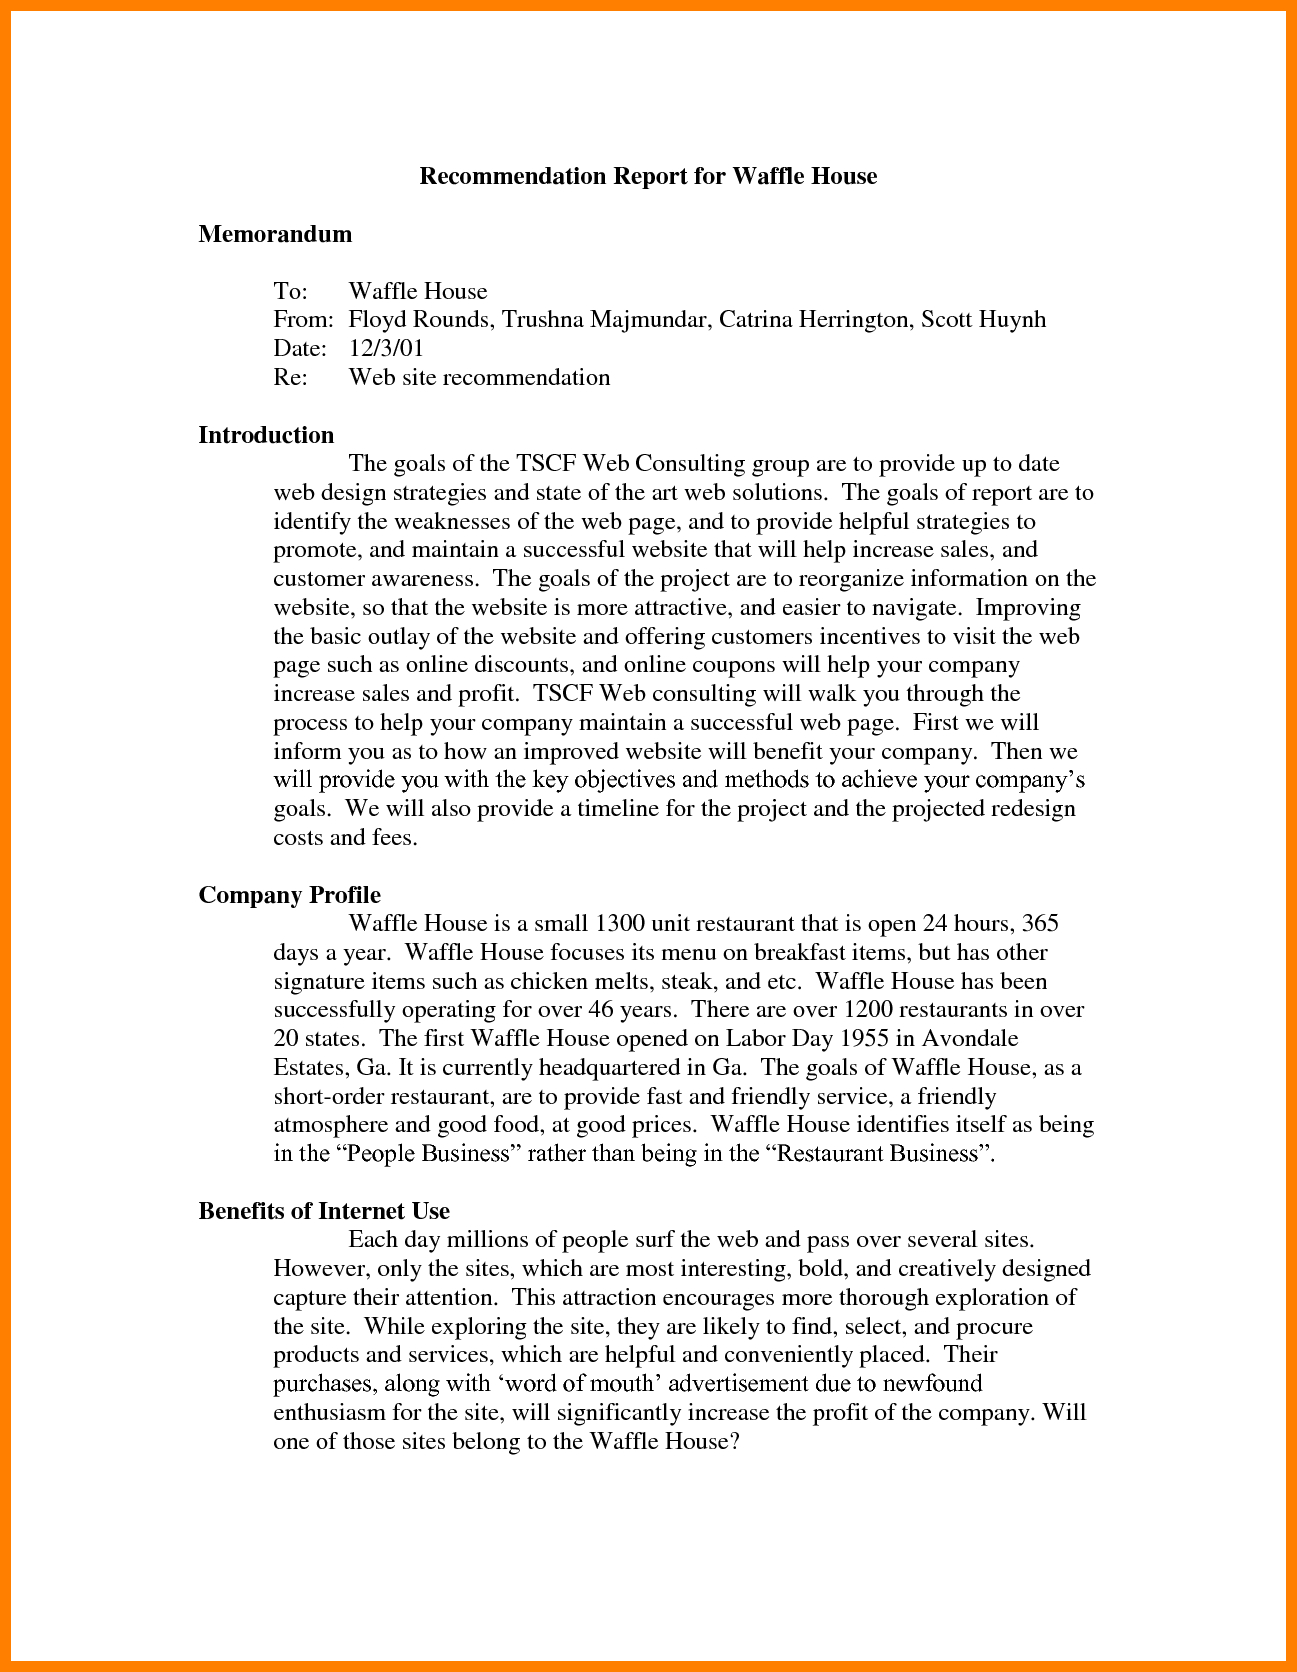 Recommendation Report Example  Letter Adress regarding Recommendation Report Template